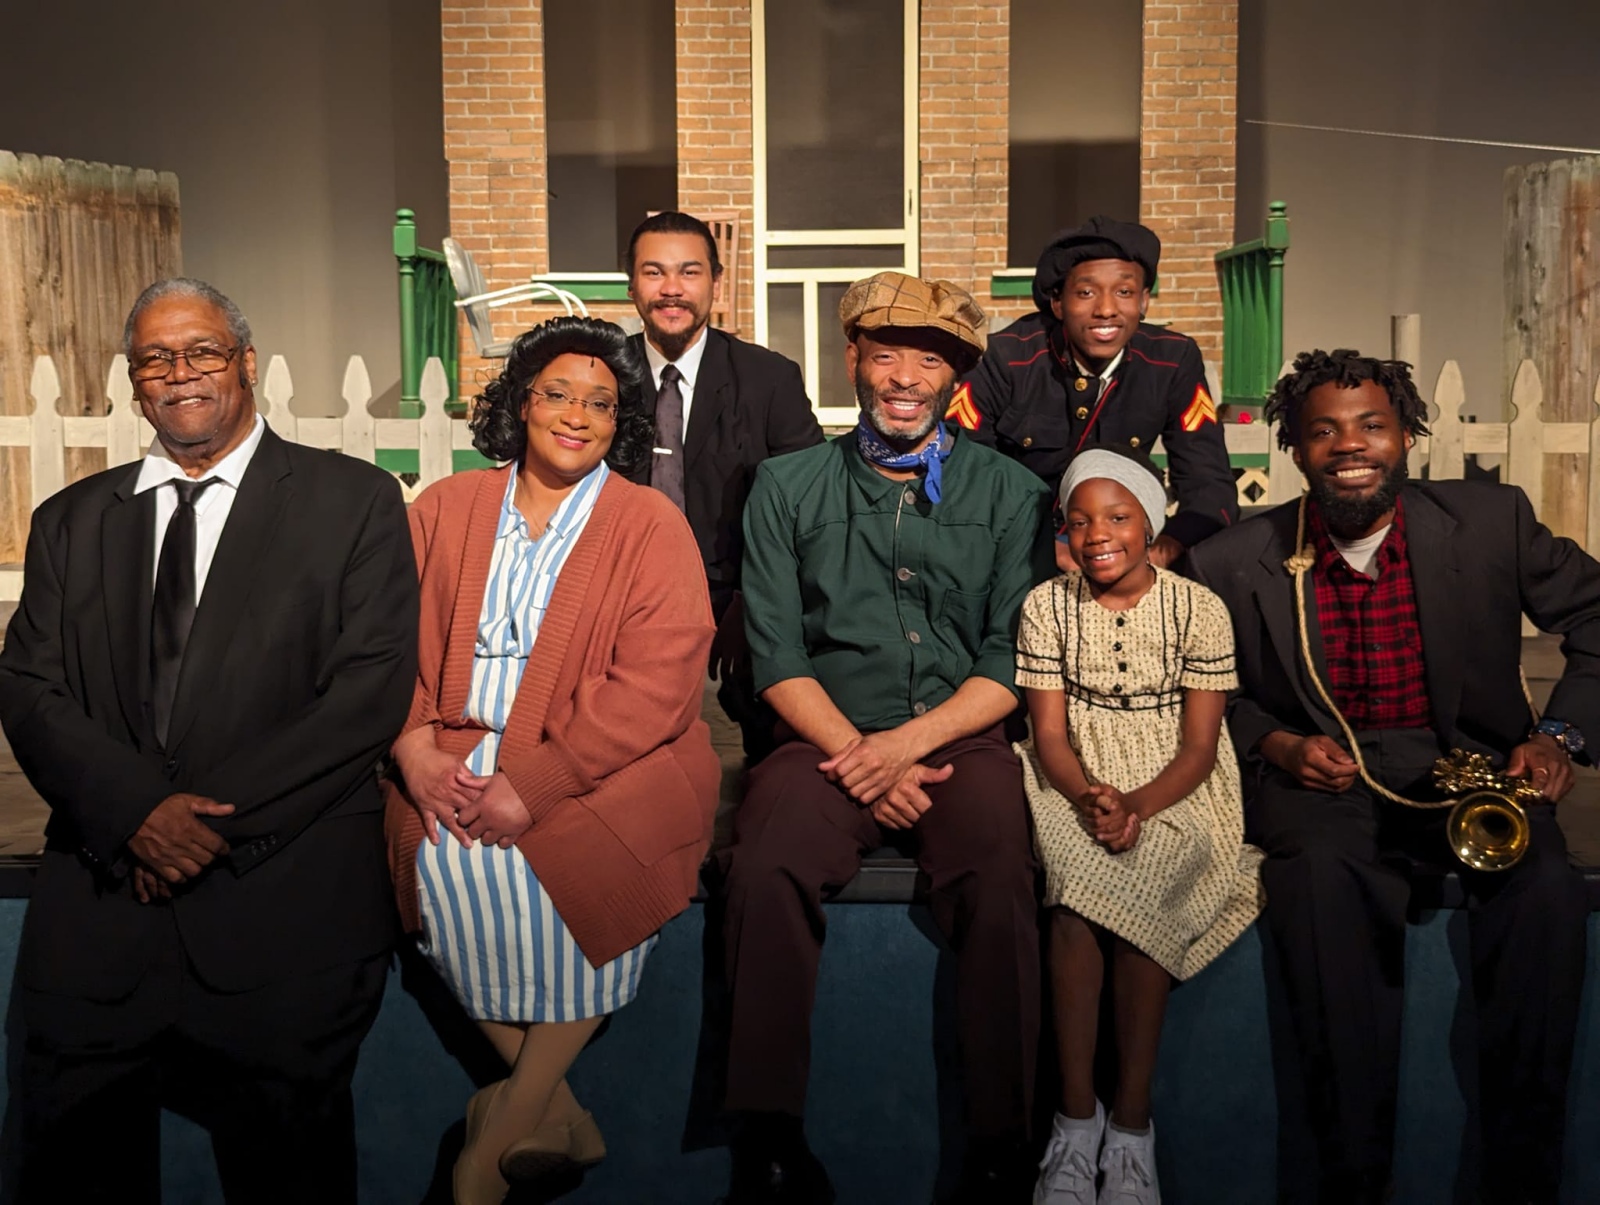 Springfield Contemporary Theatre stages Pulitzer Prize-winning drama ‘Fences'